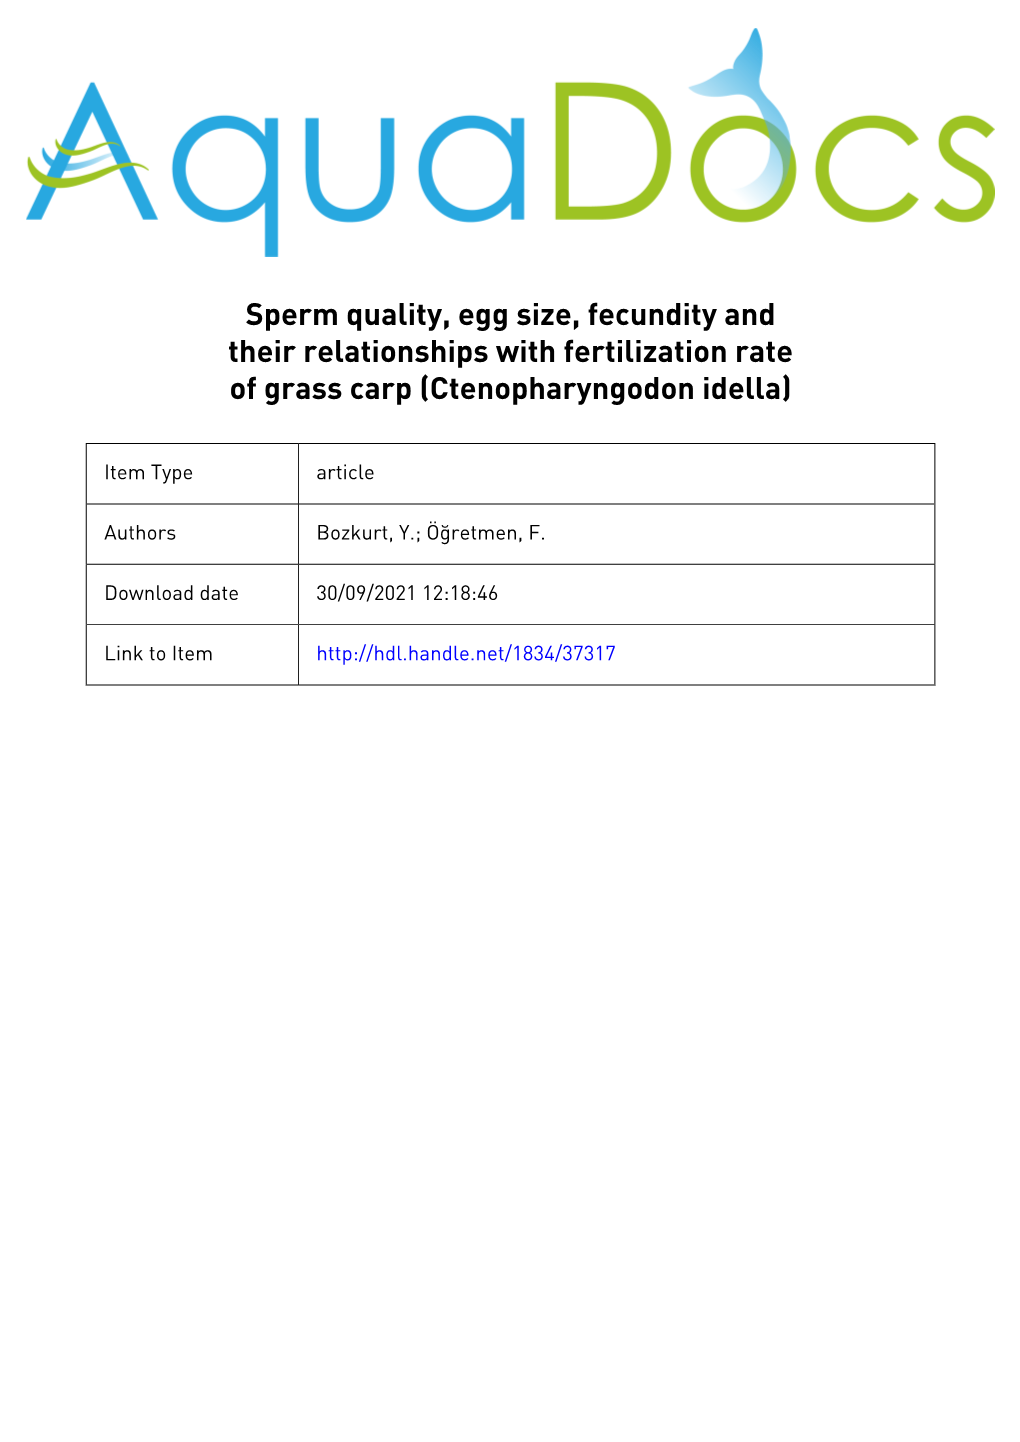 Sperm Quality, Egg Size, Fecundity and Their Relationships with Fertilization Rate of Grass Carp (Ctenopharyngodon Idella)